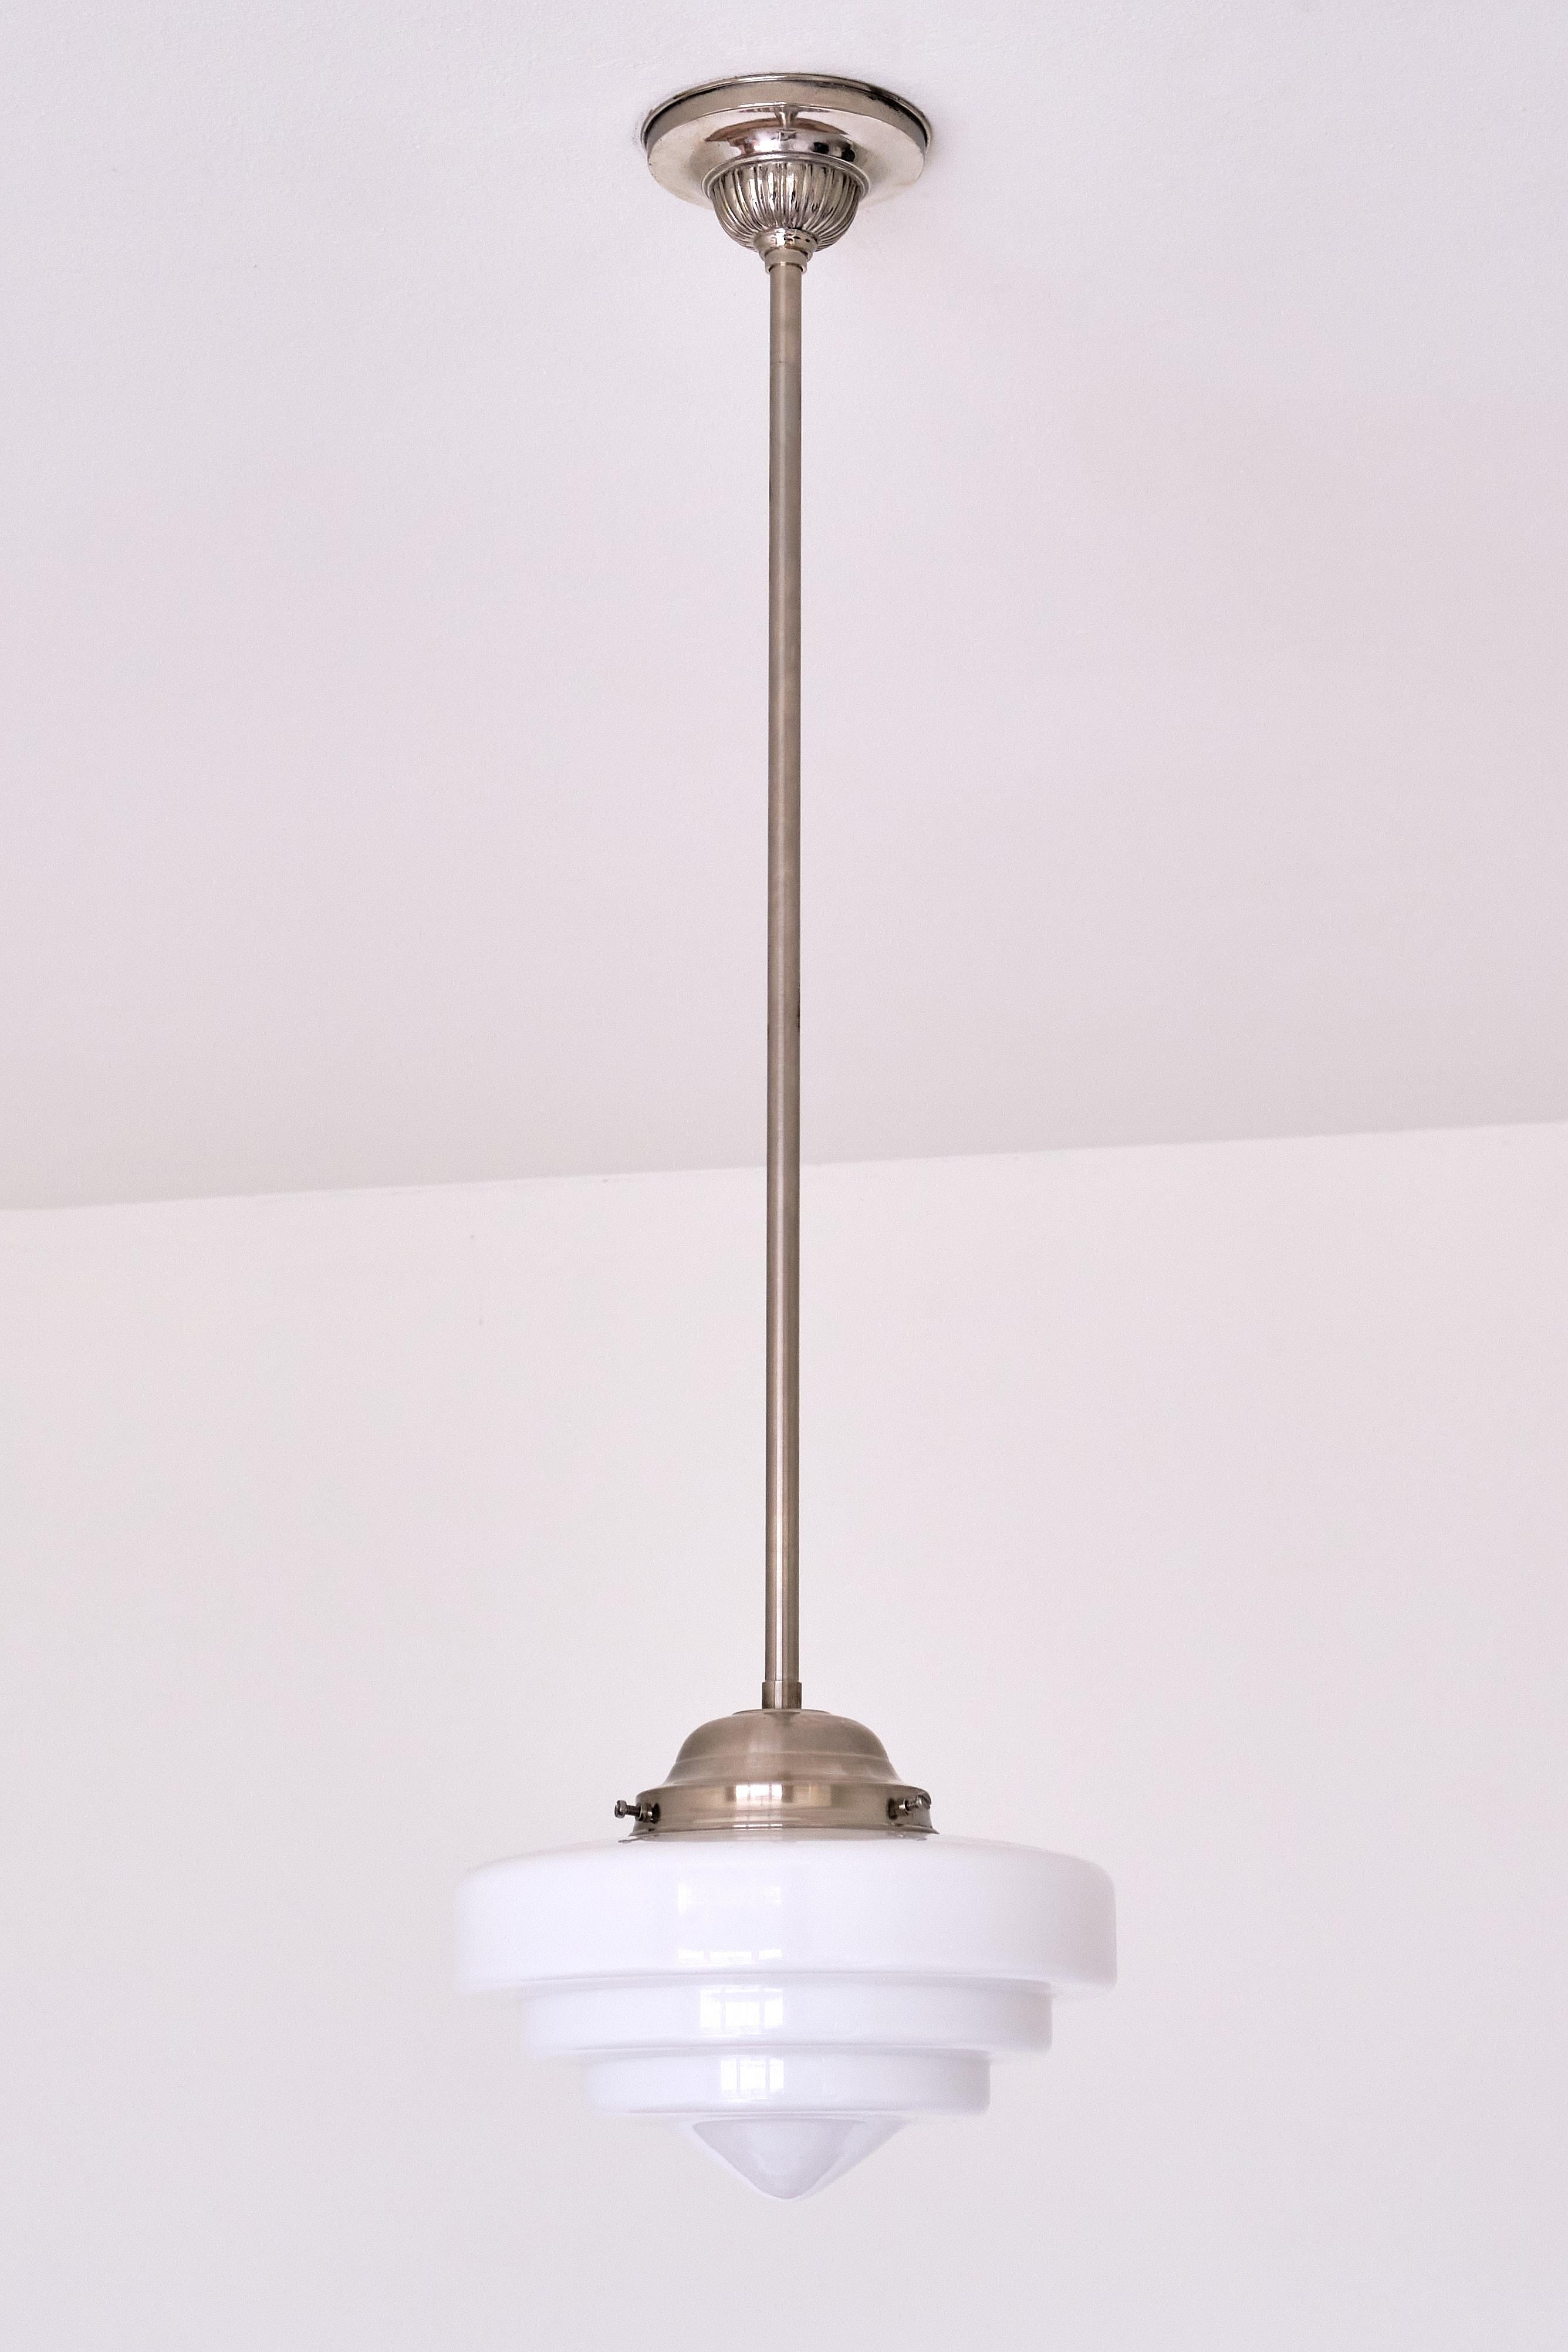 This rare pendant light was produced by Gispen in The Netherlands in the 1950s. The striking shade is in a three tiered, cascading shape ending in a rounded flattened cone shape. The shade is made of a slightly glossy, white opaline glass. The shade